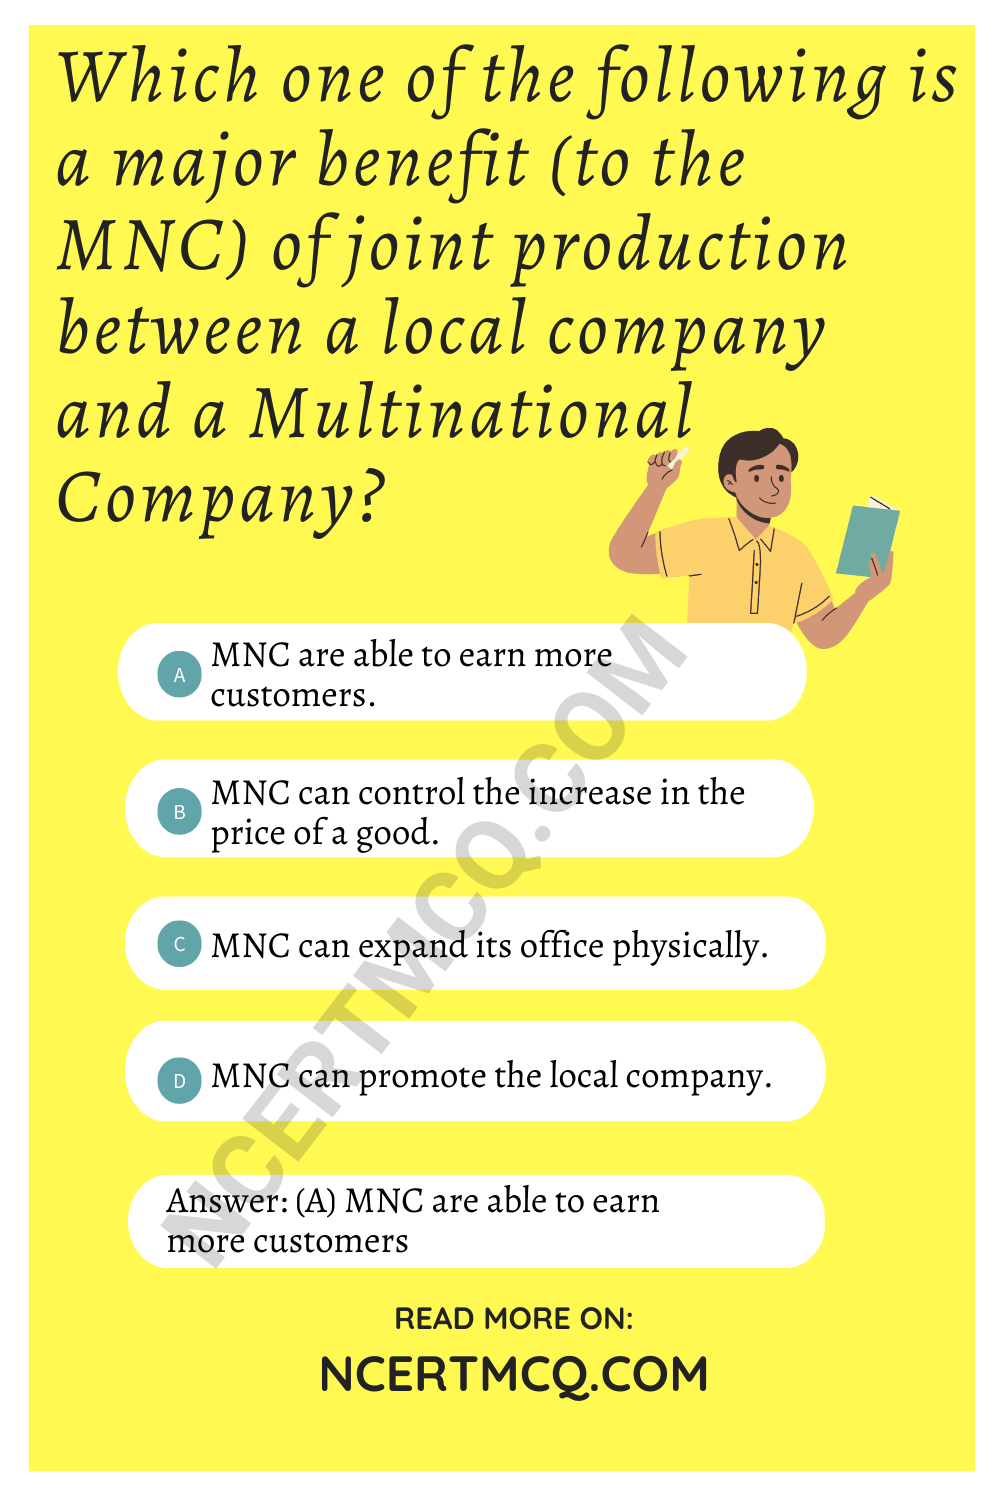 Which one of the following is a major benefit (to the MNC) of joint production between a local company and a Multinational Company?